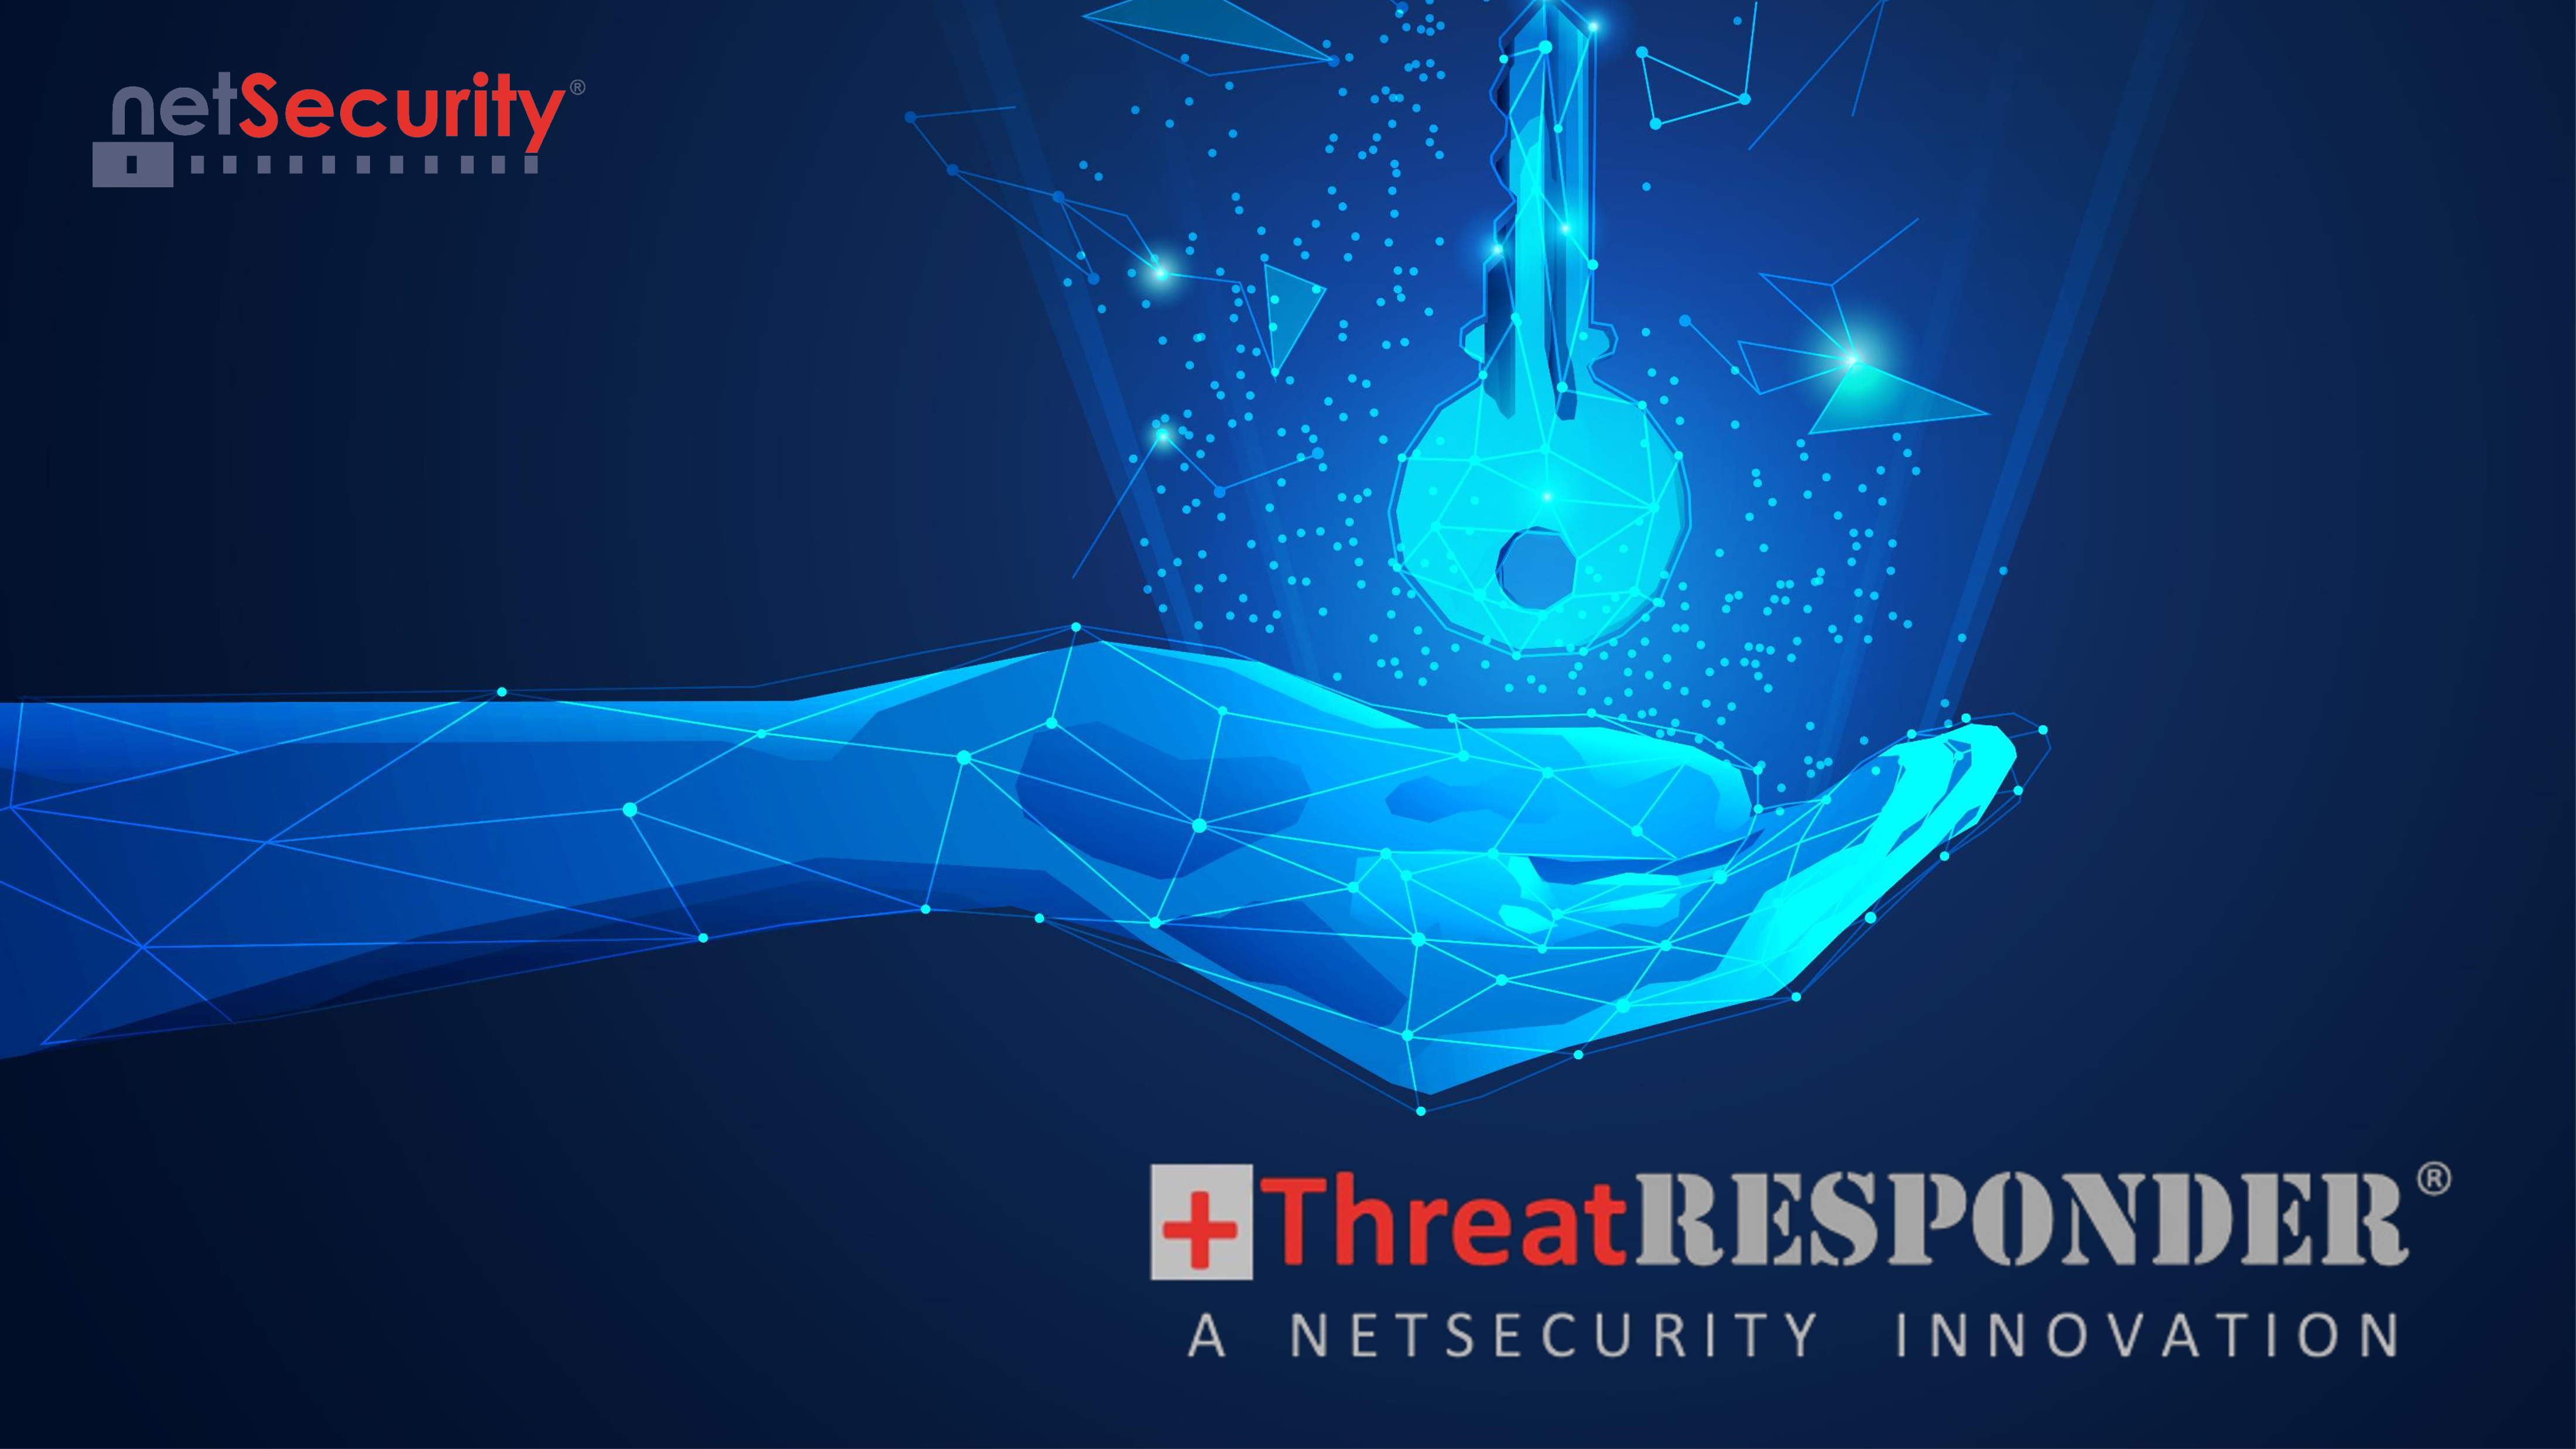 How NetSecurity’s ThreatResponder Platform Can Help Your Business Stay Ahead of the Latest Cyber Threats